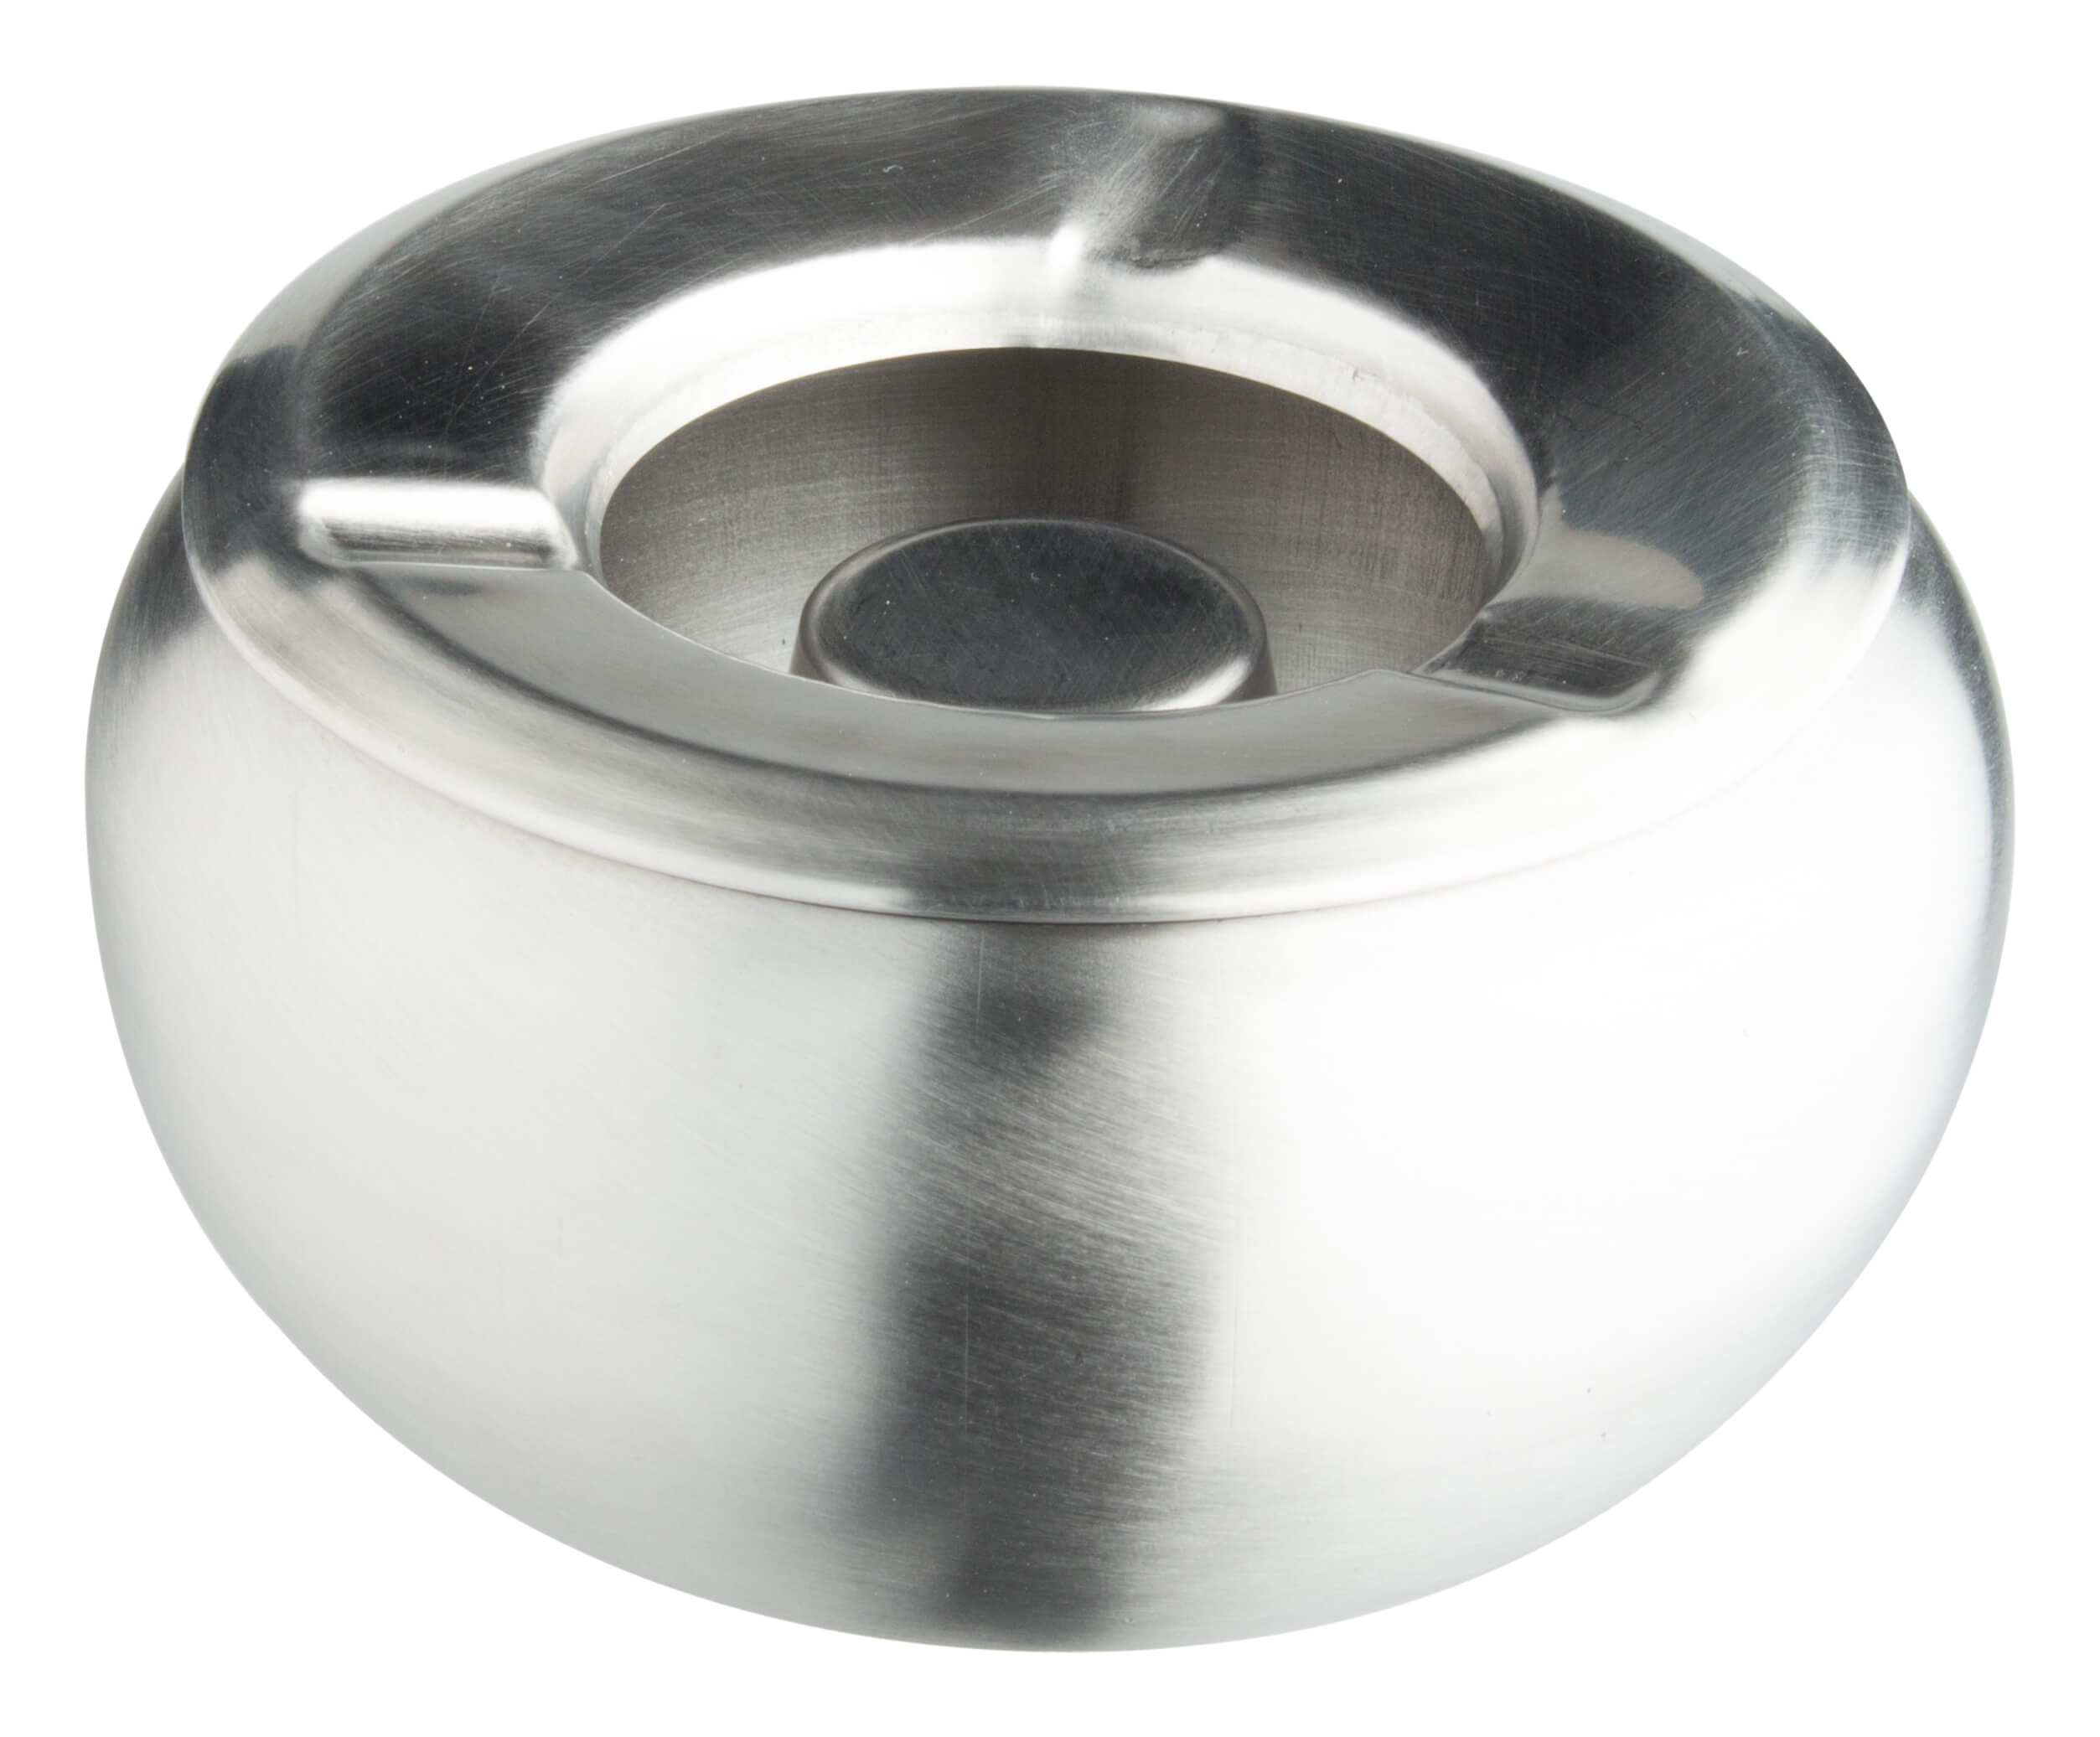 Wind ashtray Bowl, stainless steel (10cm)